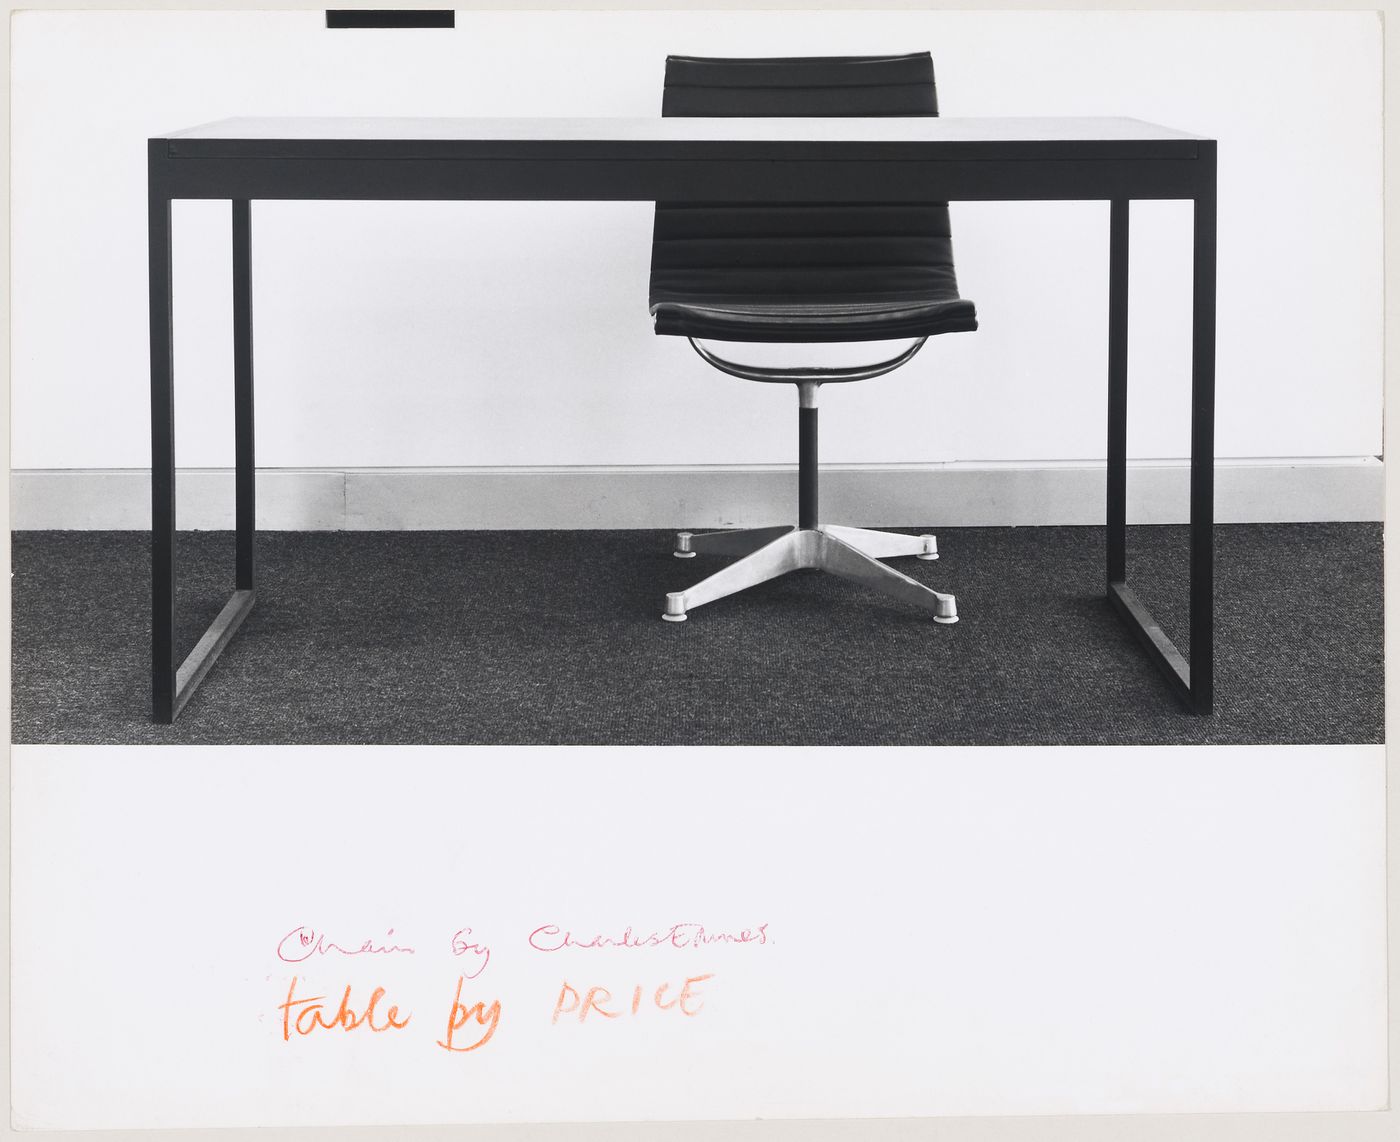 View of a table designed by Cedric Price for the Robert Fraser Gallery, with a chair by Charles Eames